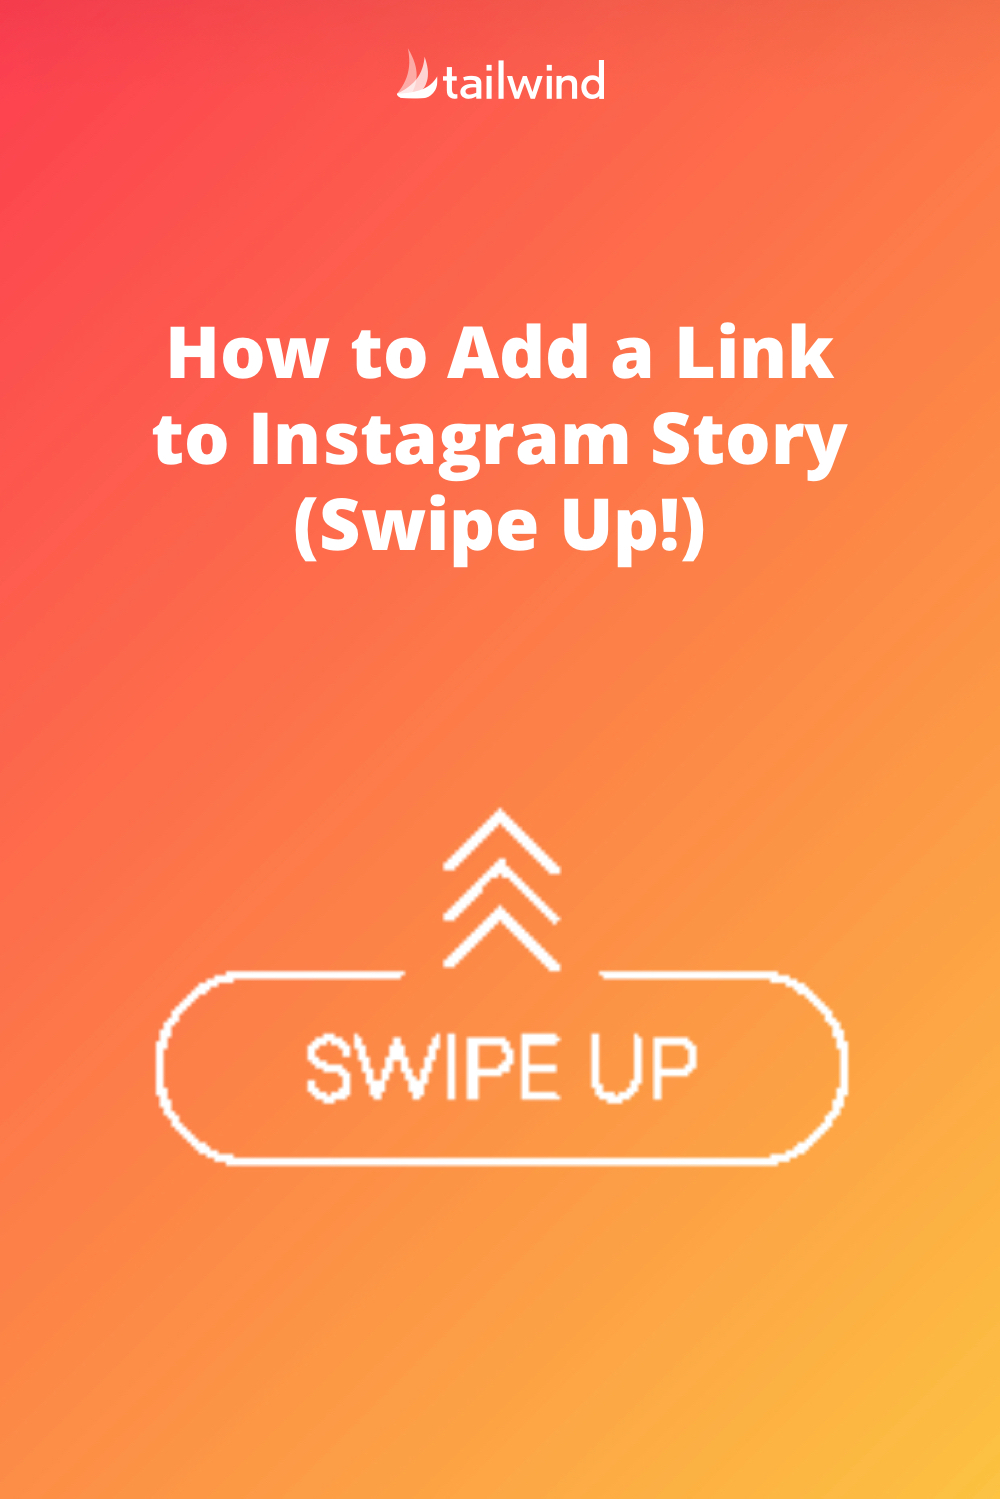 i cant add link to instagram story